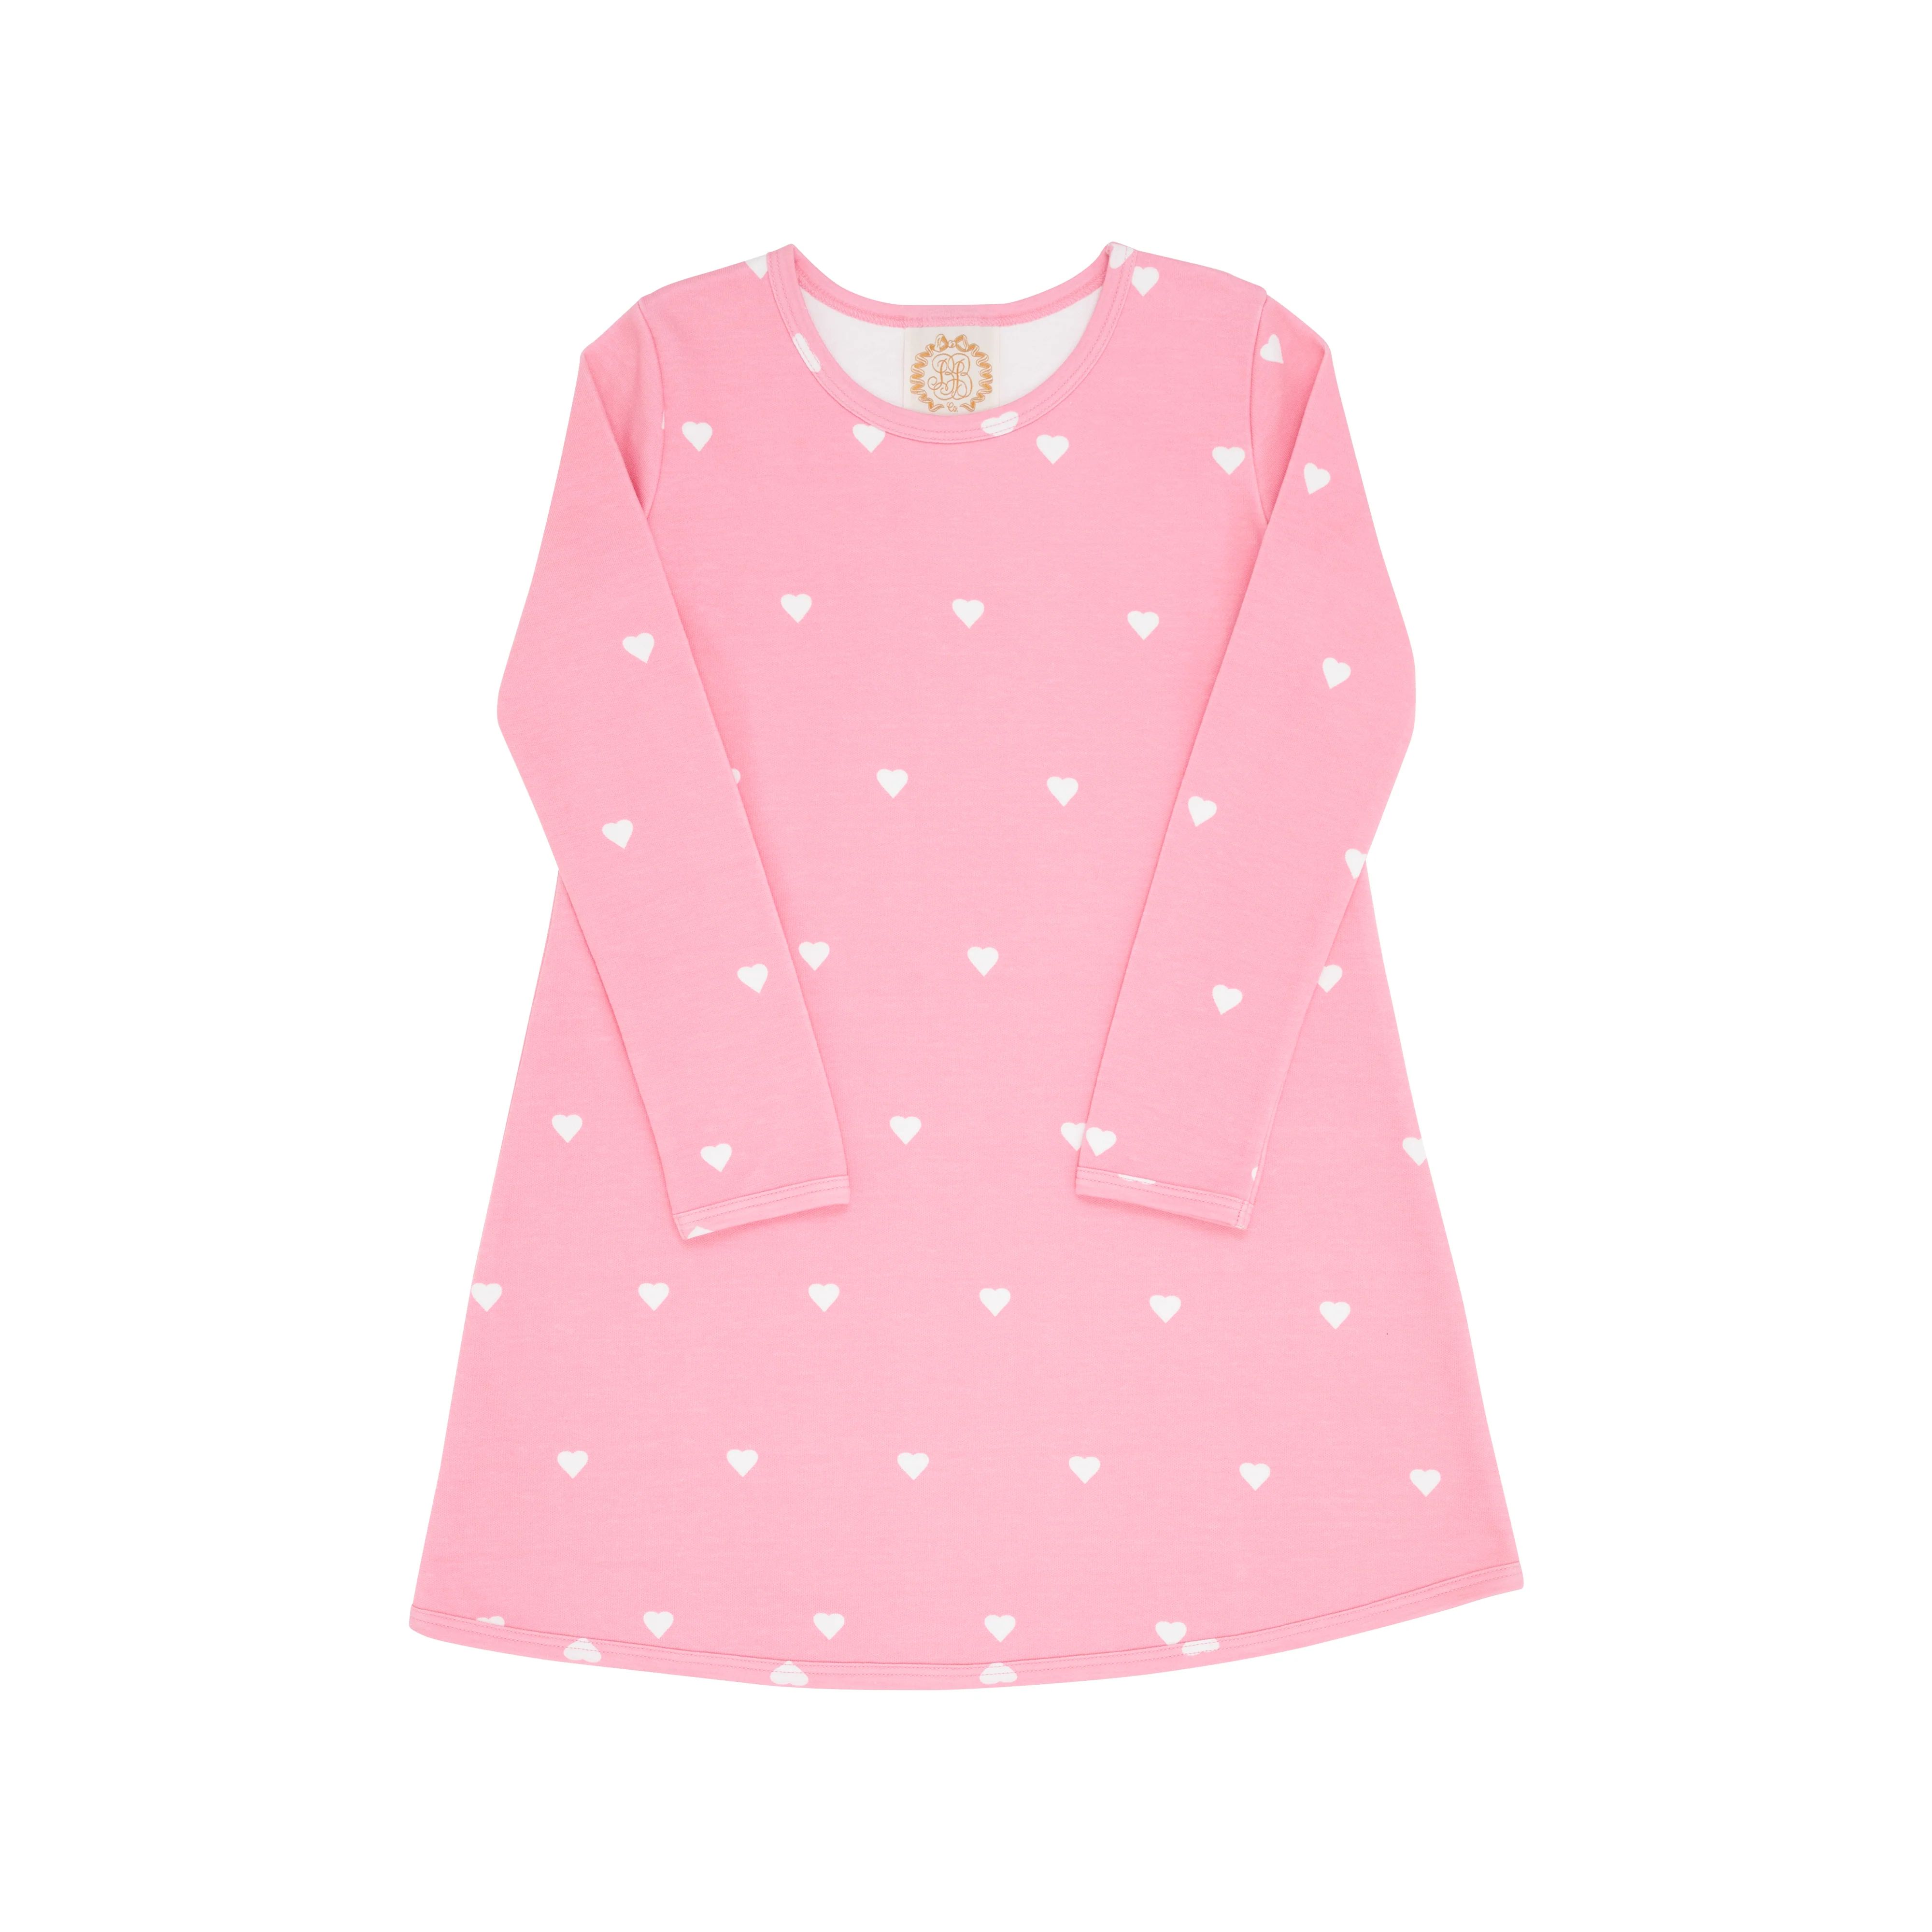 Long Sleeve Polly Play Dress - Heart Eyes (Hamptons Hot Pink) with Worth Avenue White | The Beaufort Bonnet Company